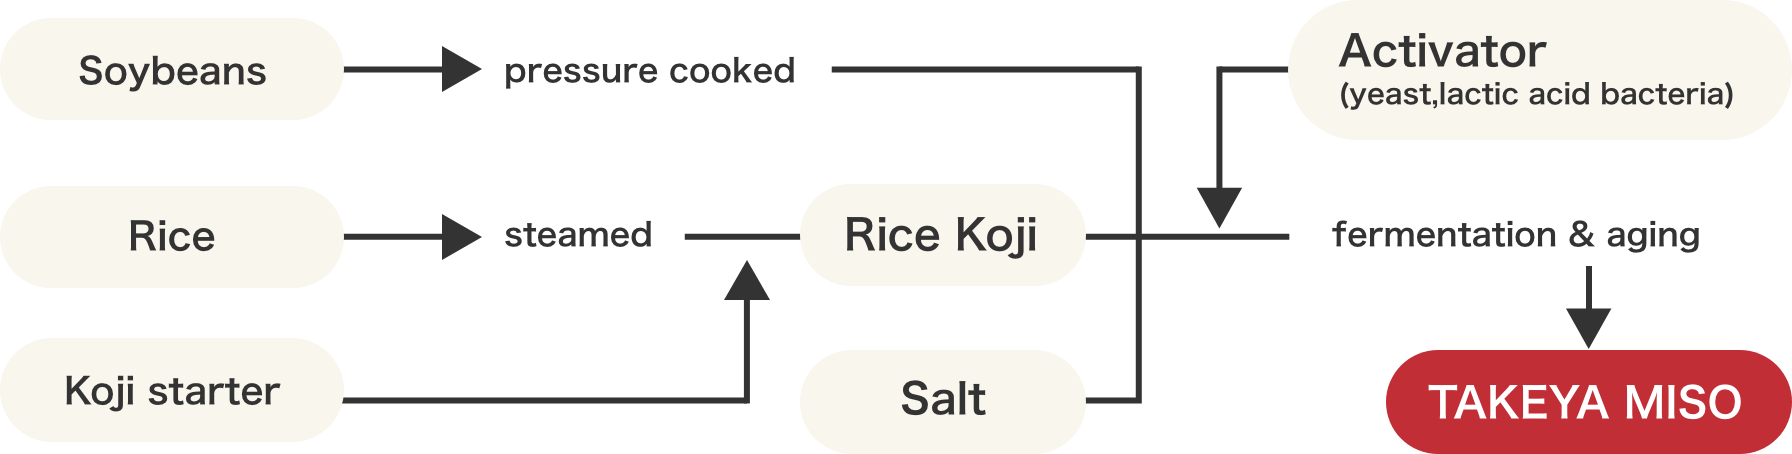 Miso-making at a glance